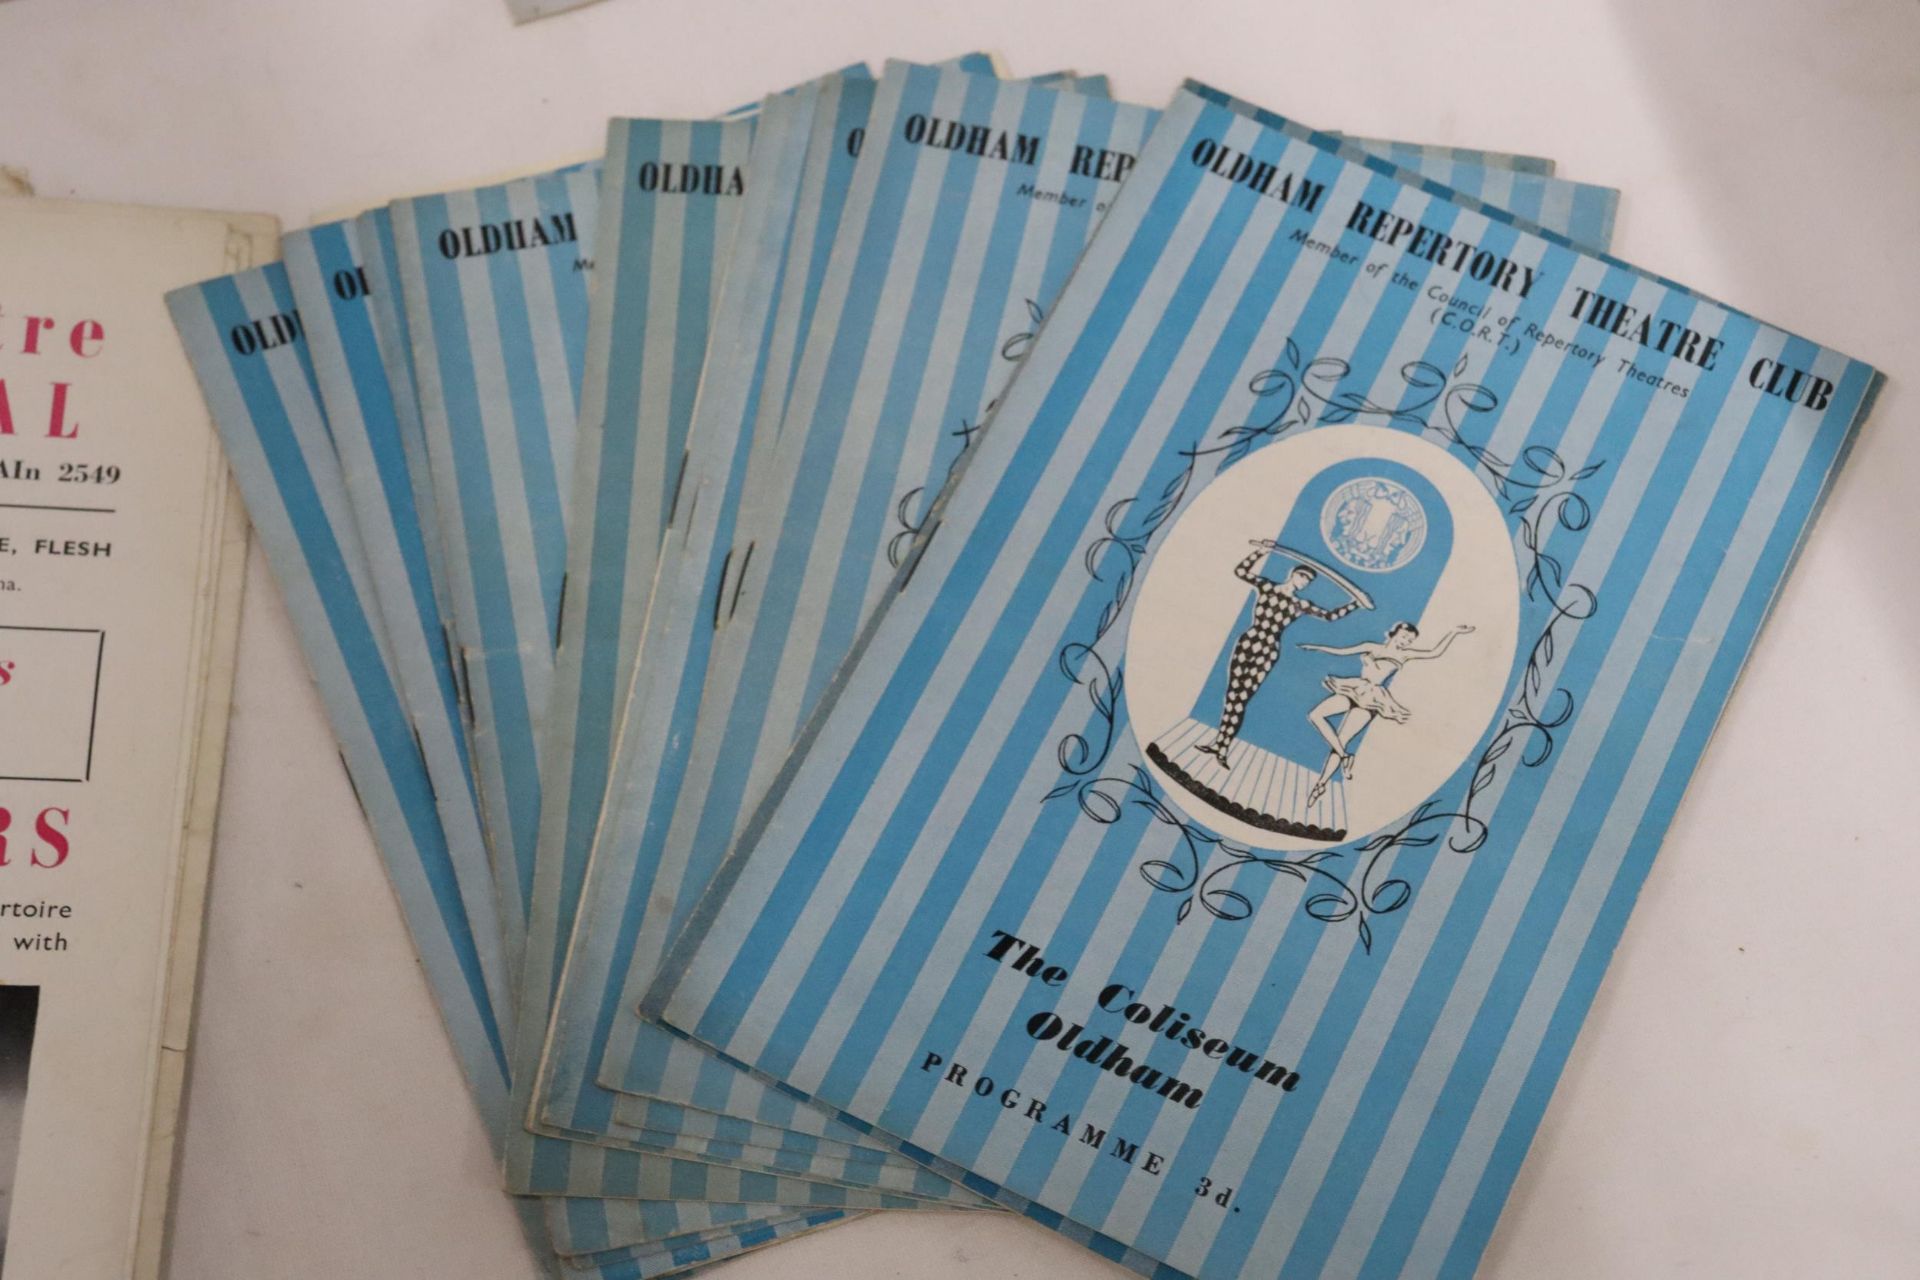 A COLLECTION OF VINTAGE THATRE PROGRAMMES RELATING TO OLDHAM REPERTORY THEATRE CLUB, PLUS TWO - Image 3 of 6